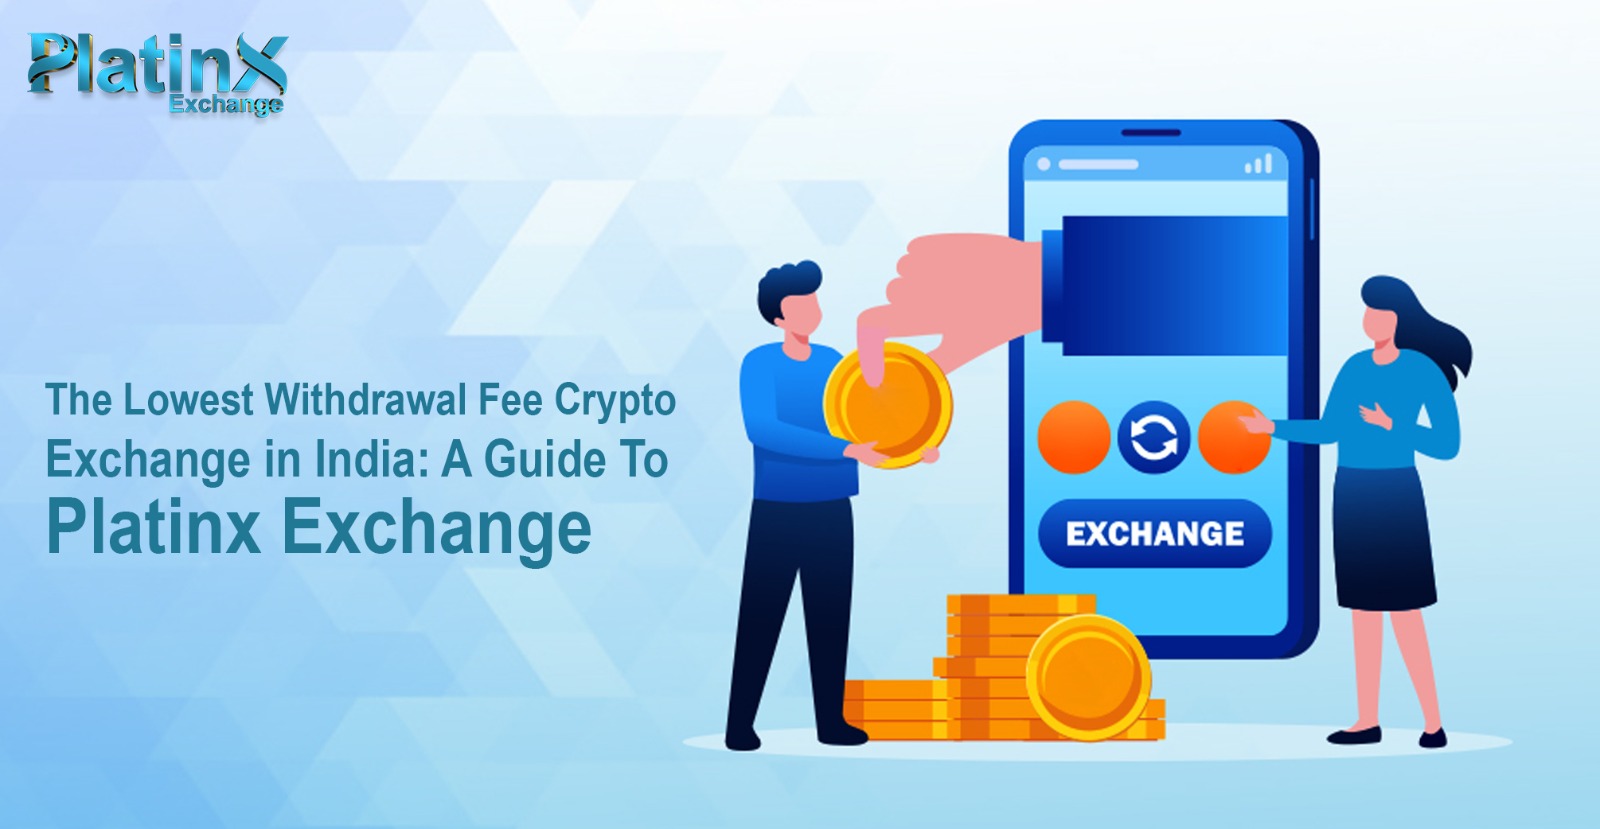 The Lowest Withdrawal Fee Crypto Exchange in India: A Guide To Platinx Exchange